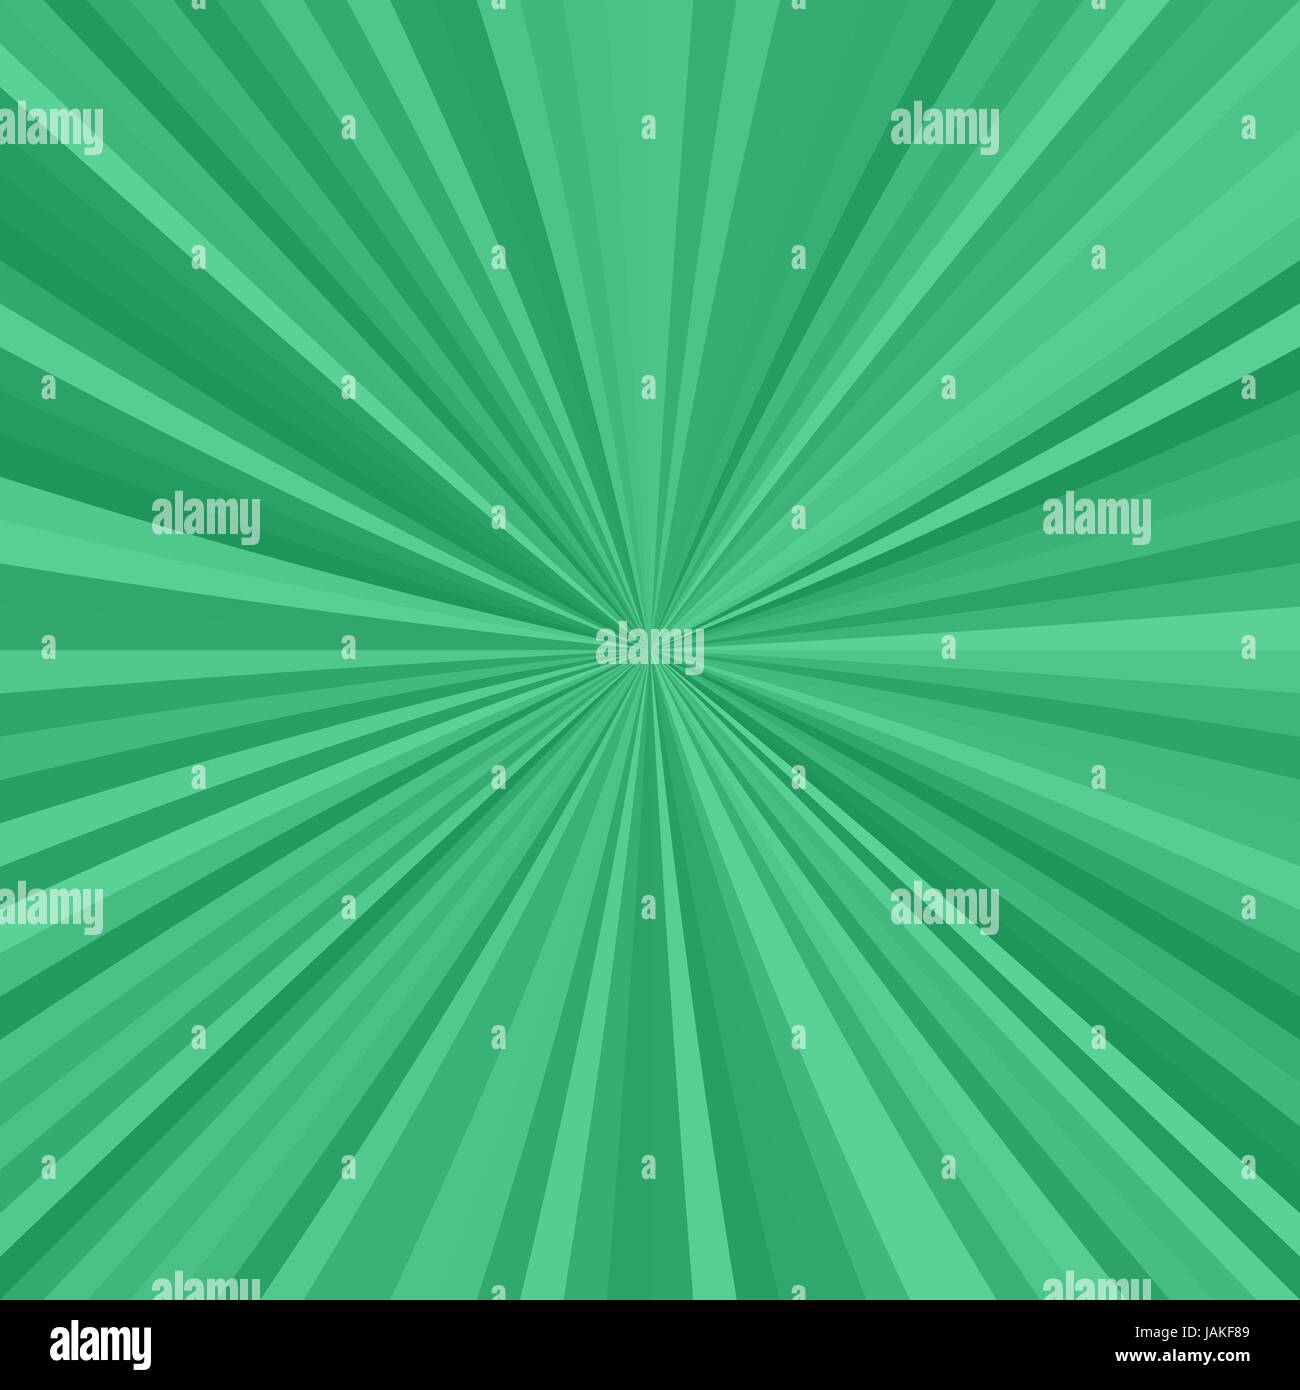 Green explosion background from radial stripes Stock Vector